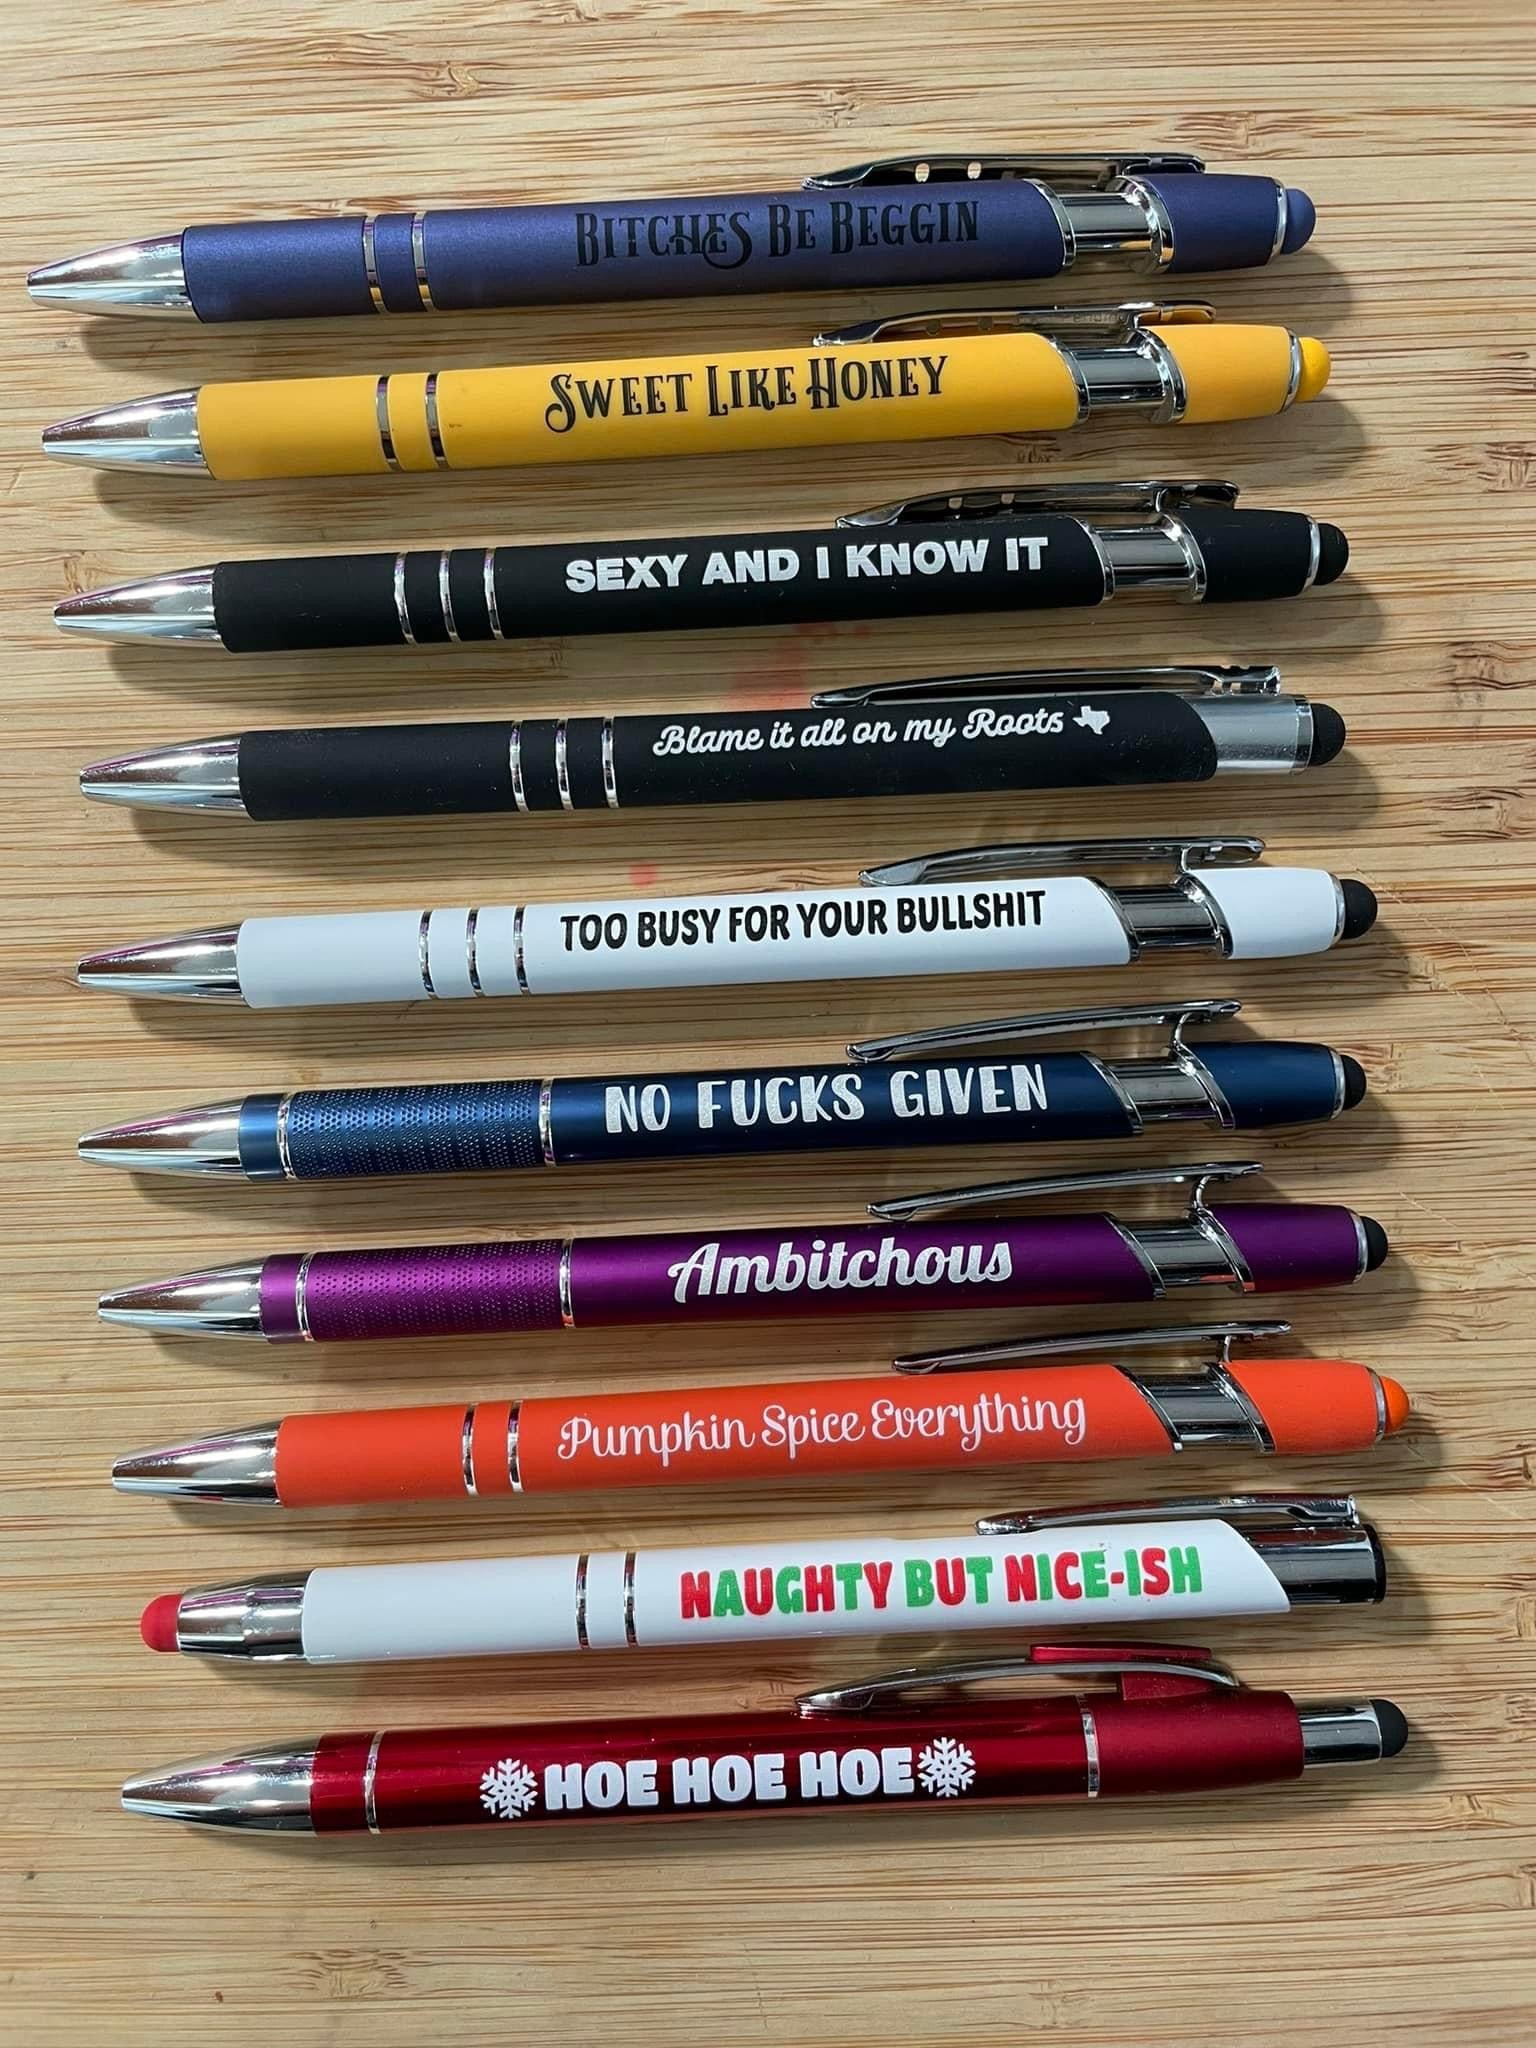 I bought these pens from a store with swear words written on them :  r/mildlyinteresting